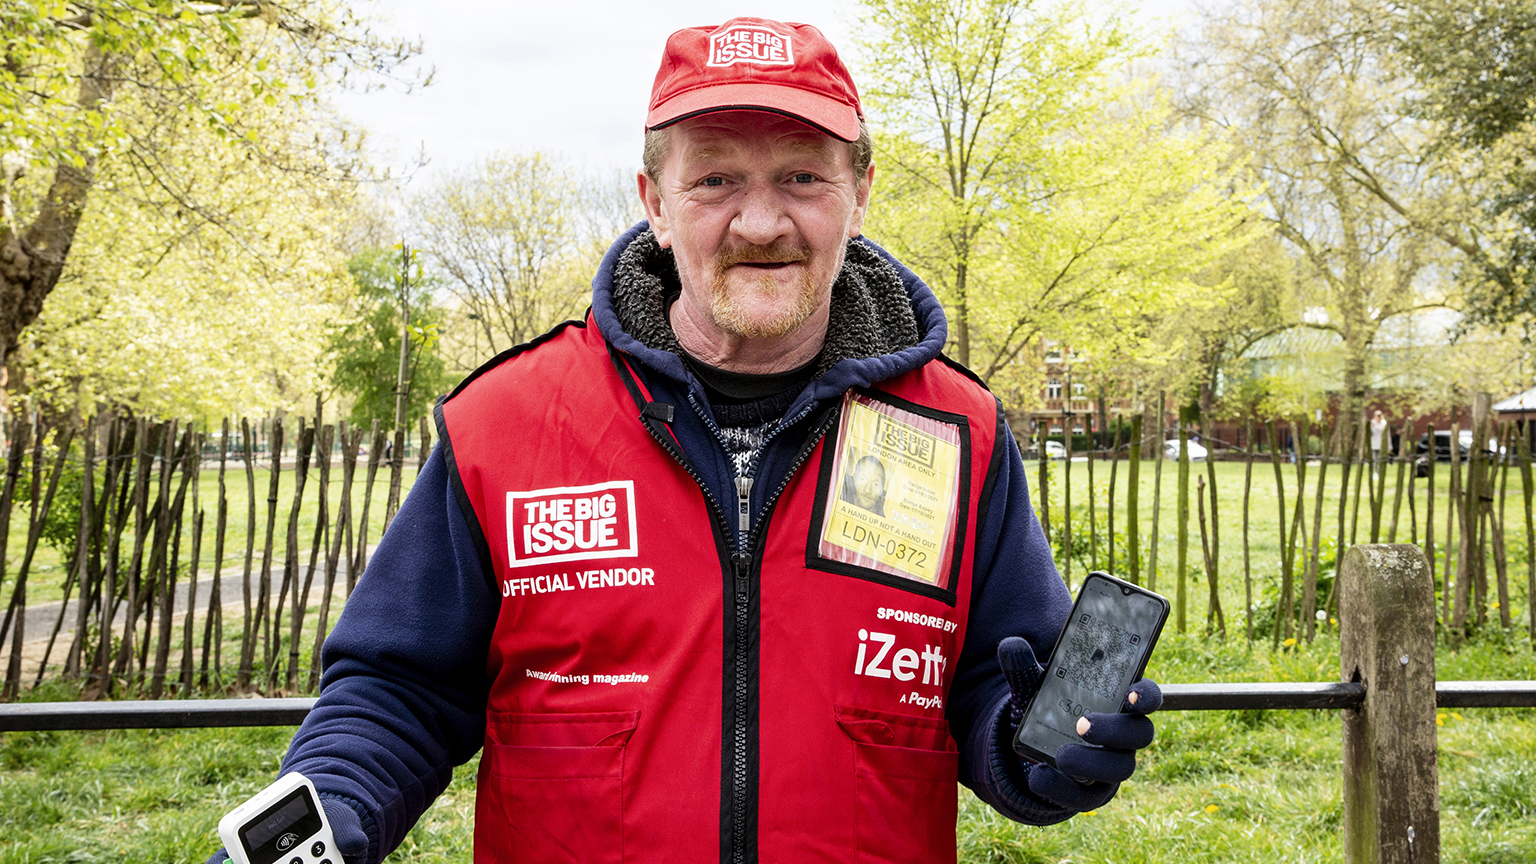 Big Issue vendor Dave's sales have been helped by going cashless. Image: Louise Haywood-Schiefer